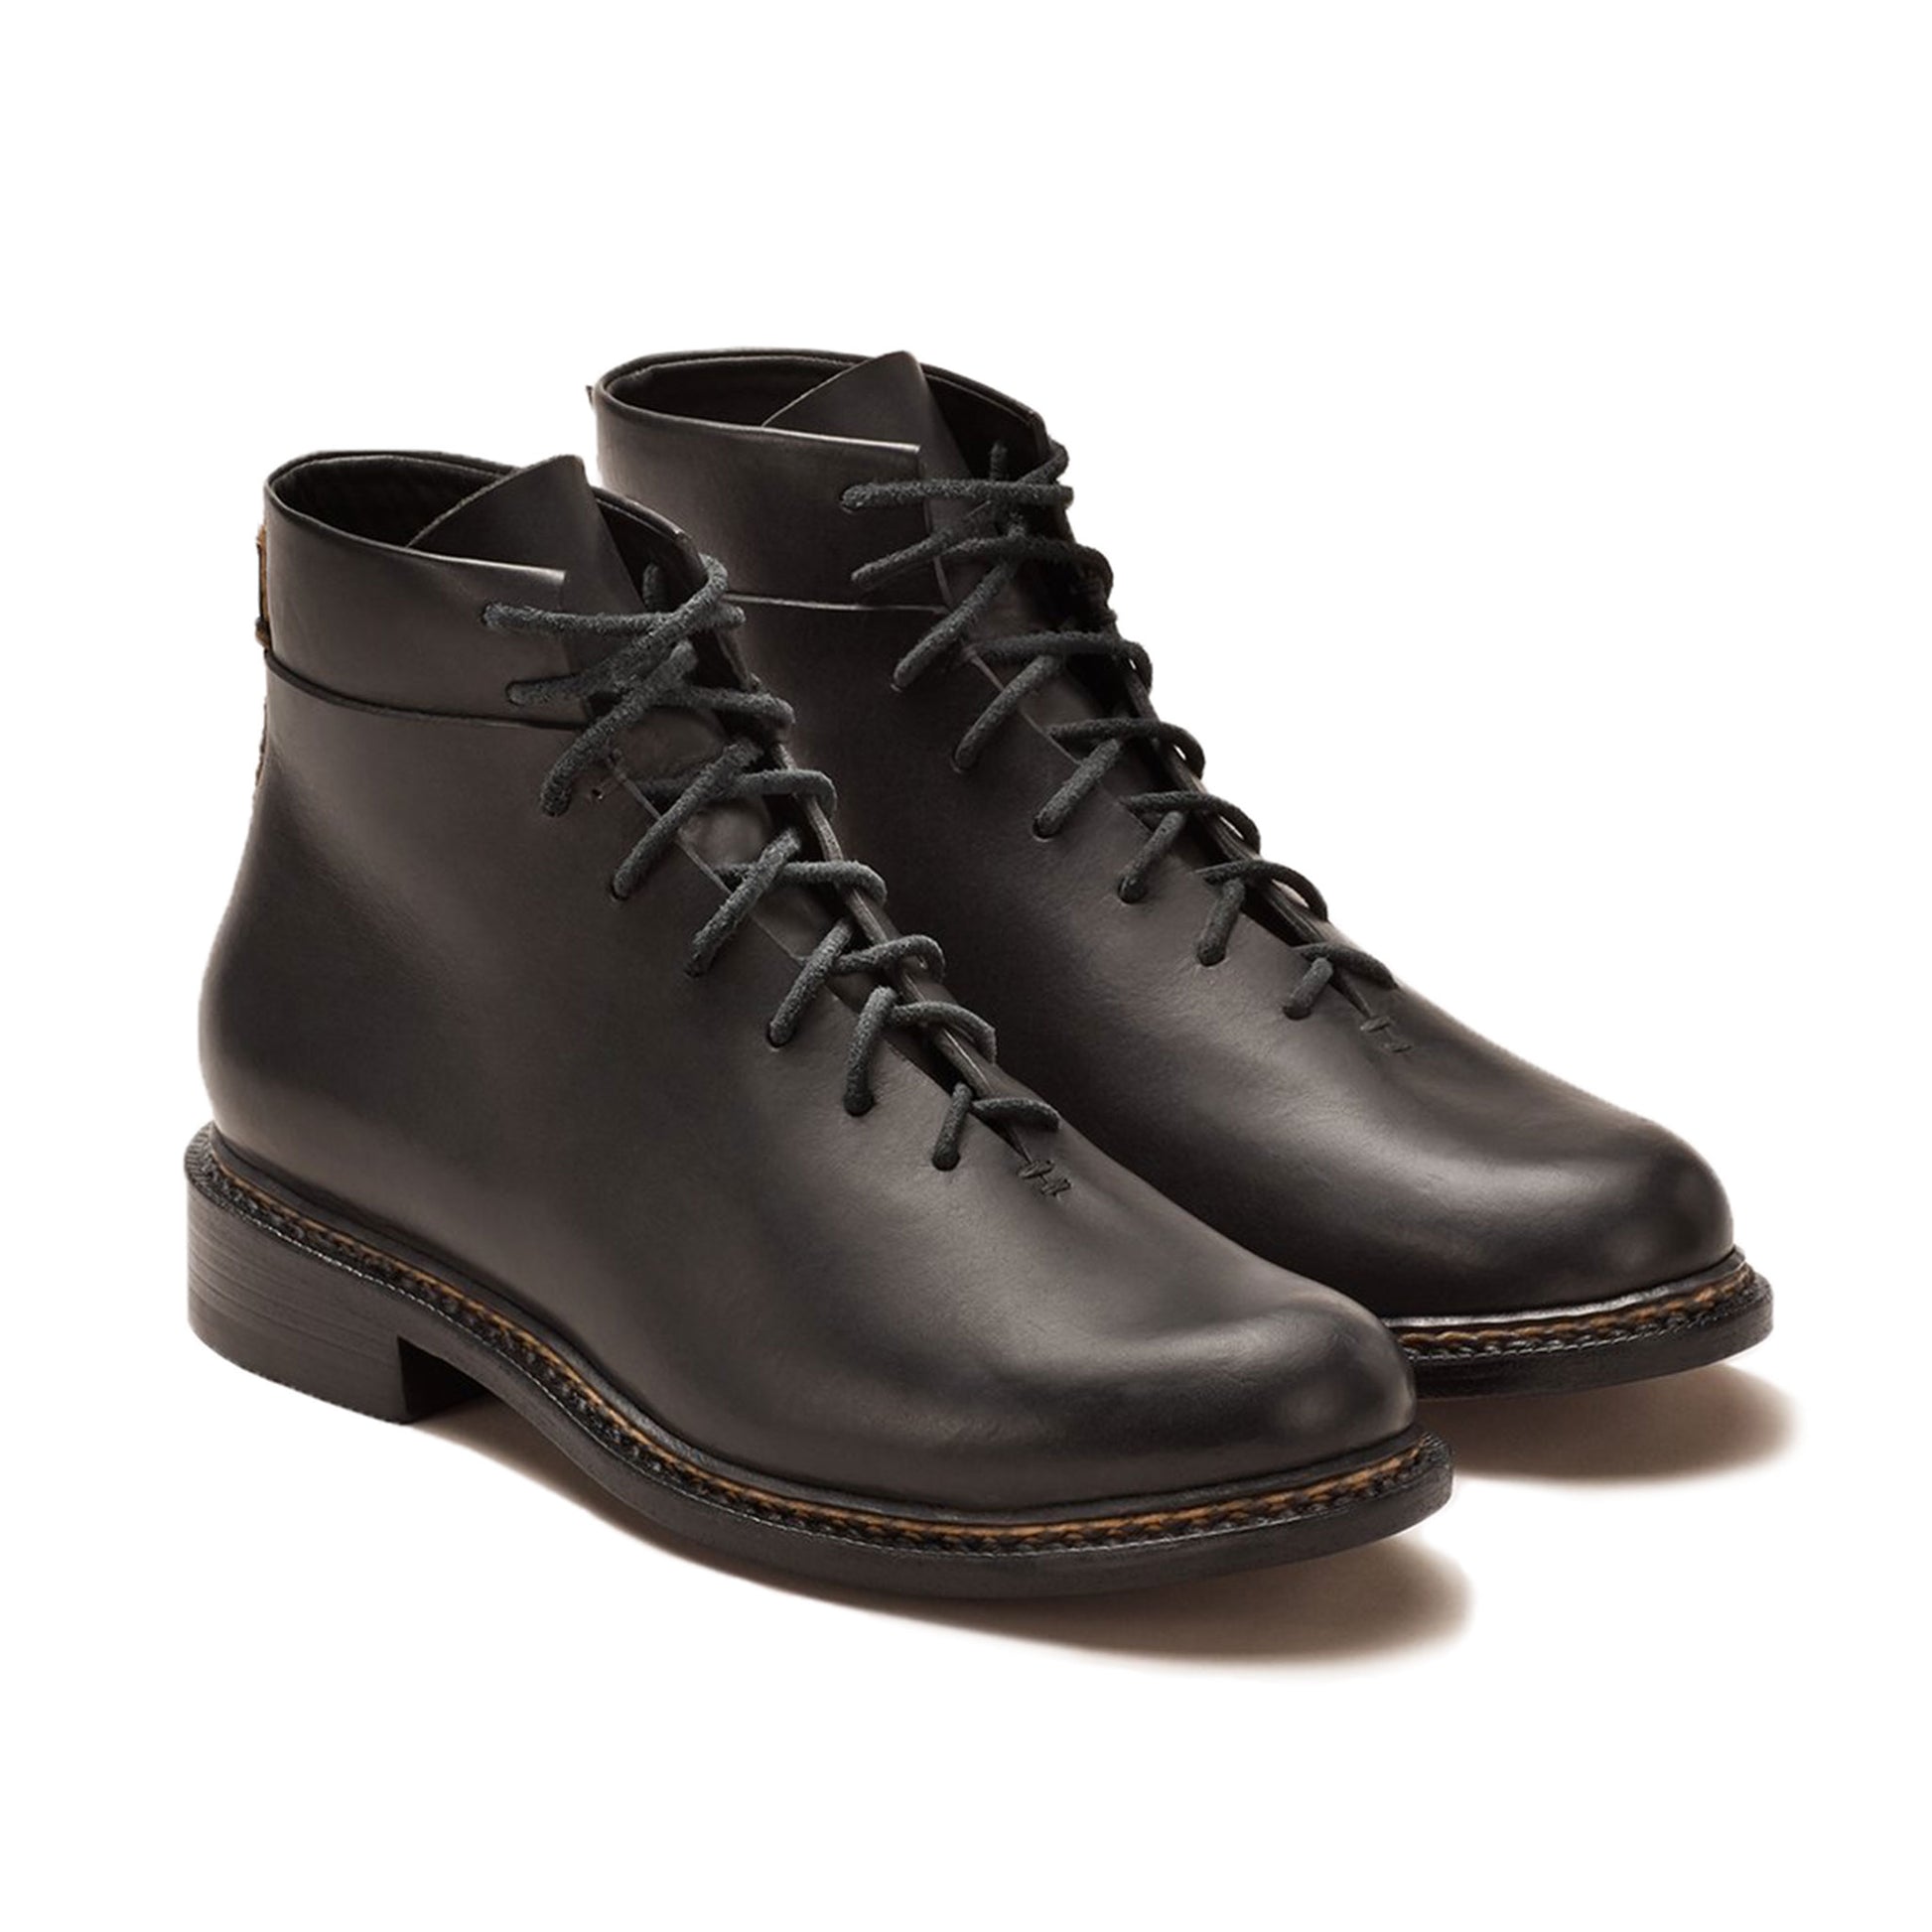 FEIT Braided Lace-Up Boots Shoes Footwear Leather Black Hero